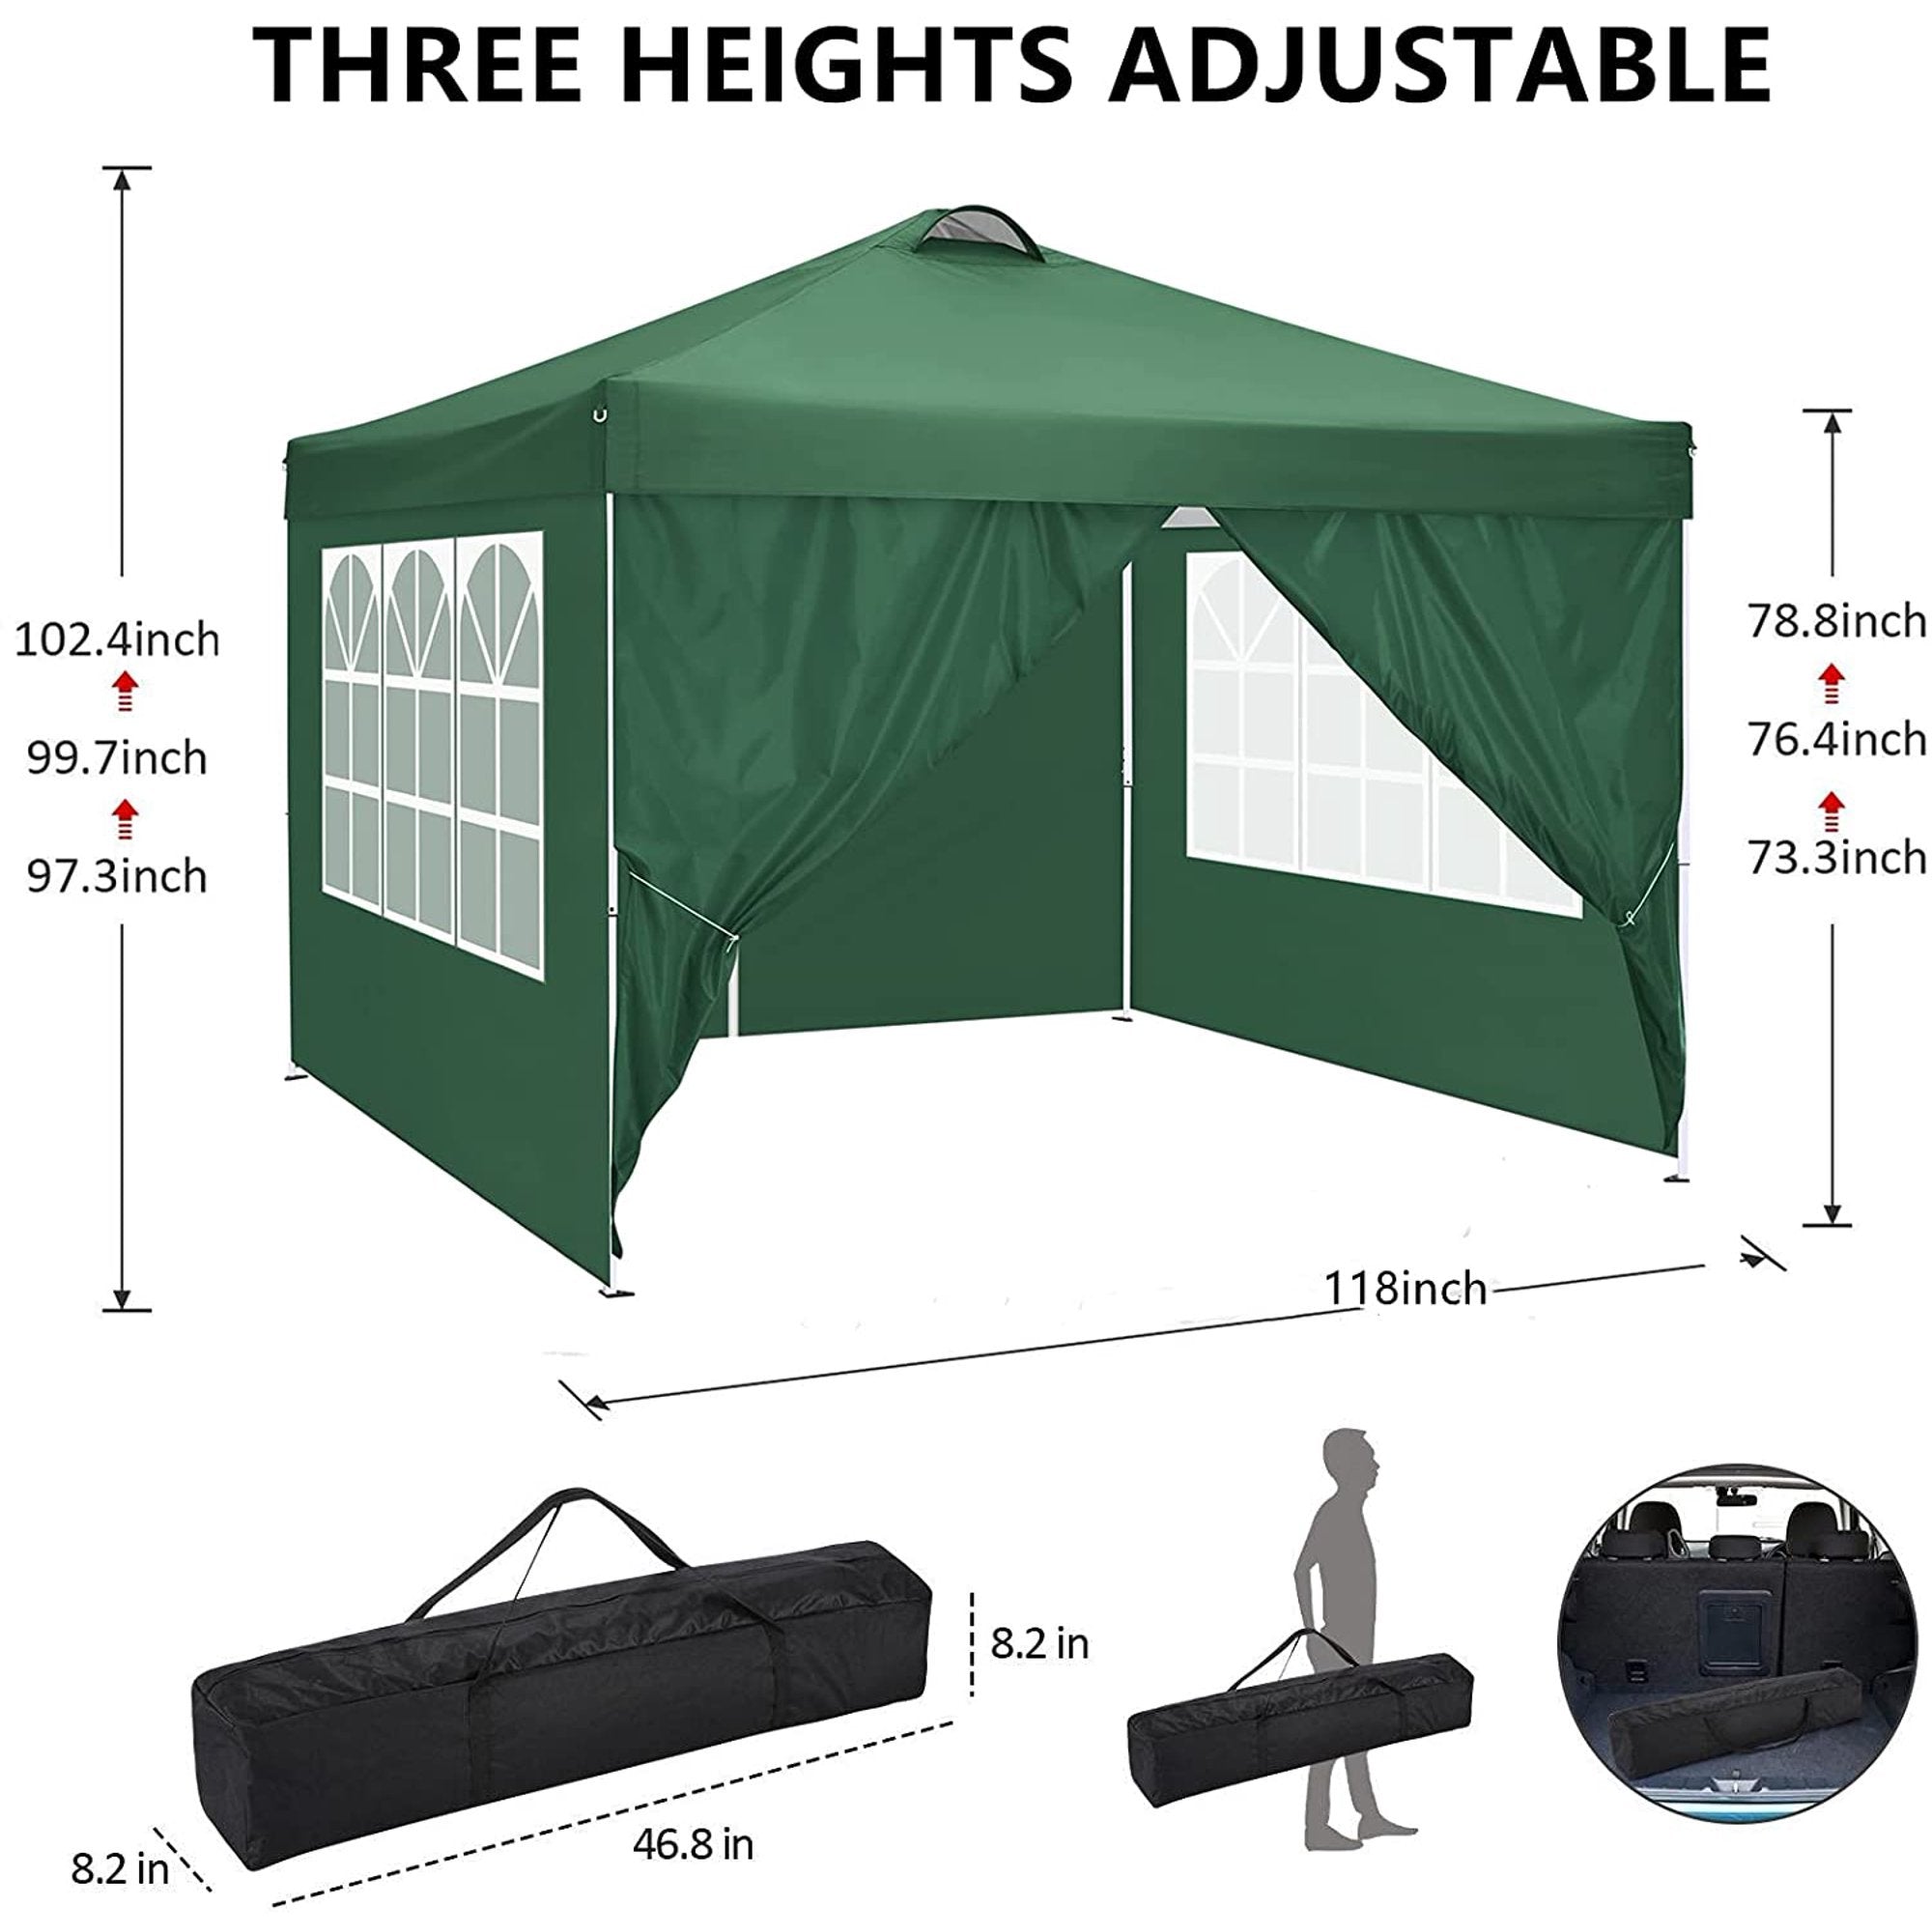 10' x 10' Canopy Tent Party Tent UV/Sun/Rain Protection Straight Leg Instant Pop Up Canopy Tent, Height Ajustable Beach Shade Tent Gazebo w/4 Removable Sidewalls, Carry Bag, 4 Sandbags, Green